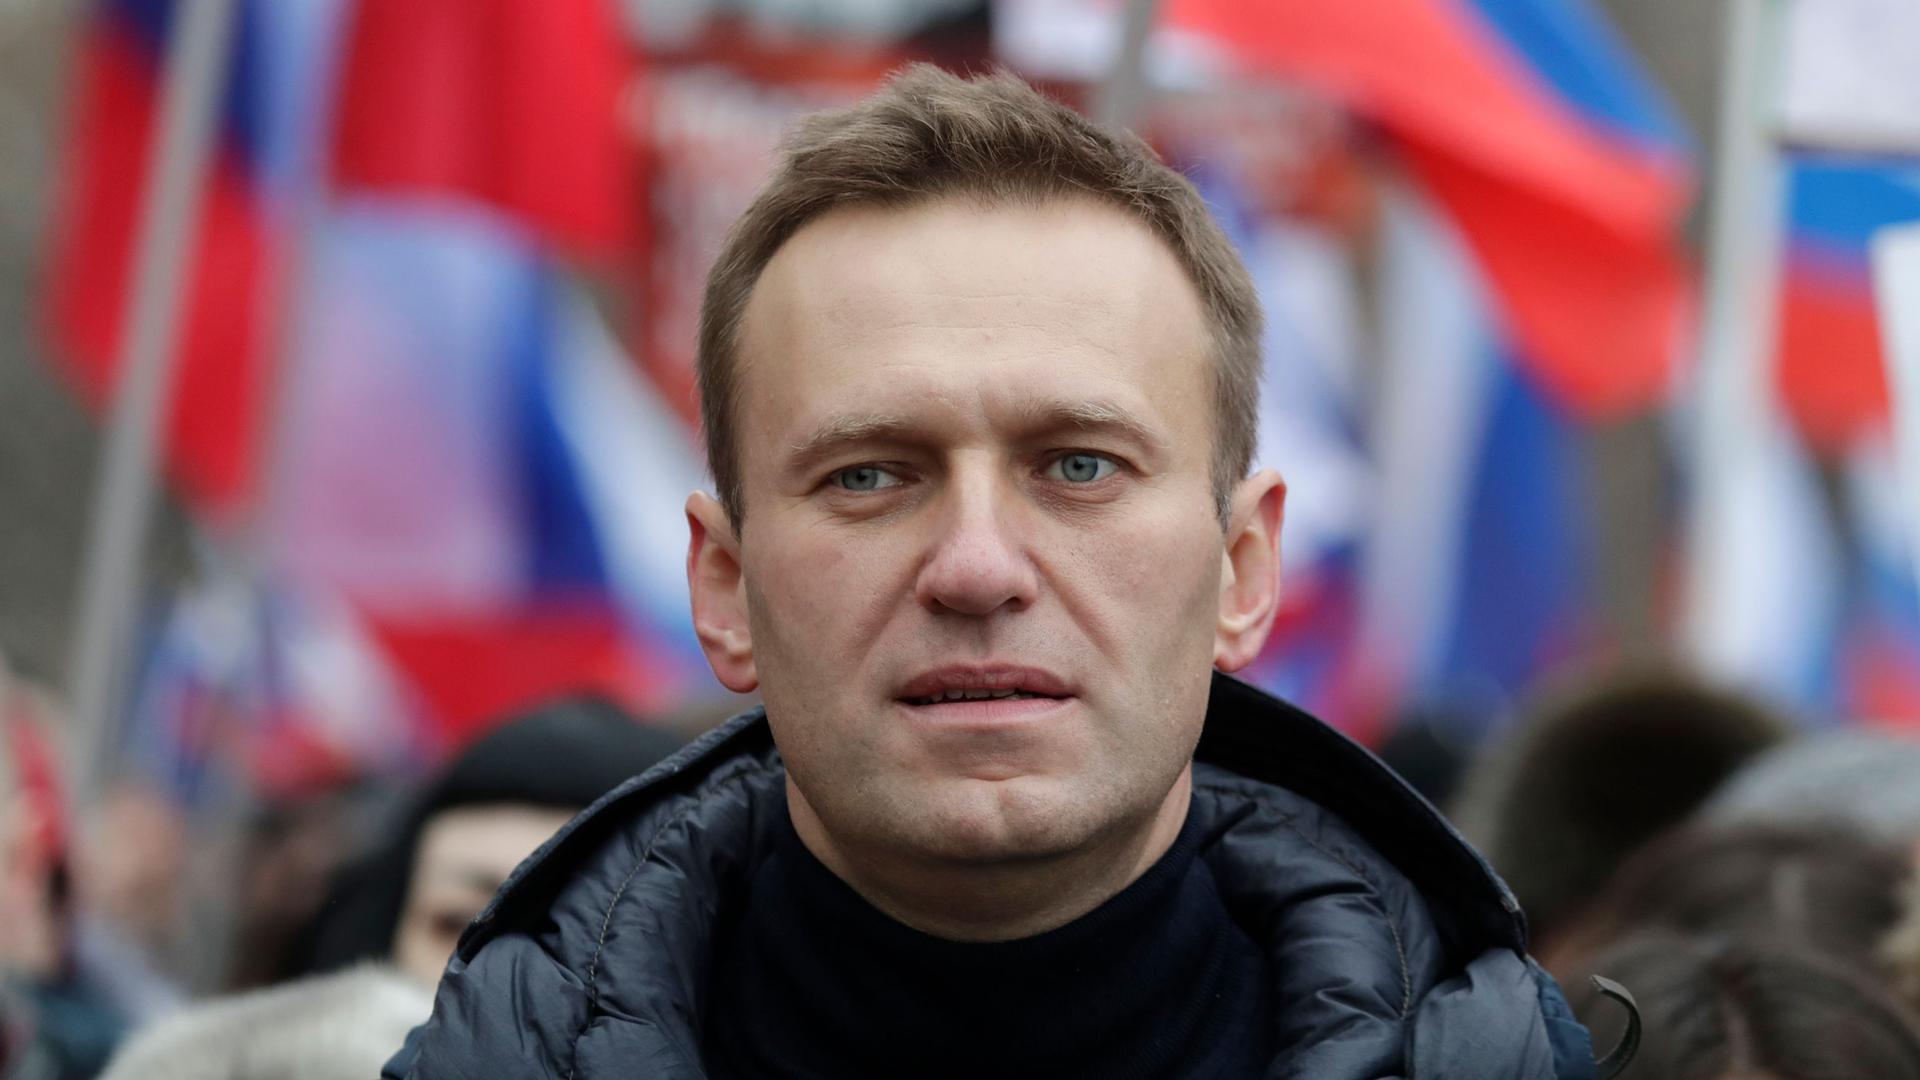 A close-up photograph of Alexei Navalny wearing a dark puffy jacket.